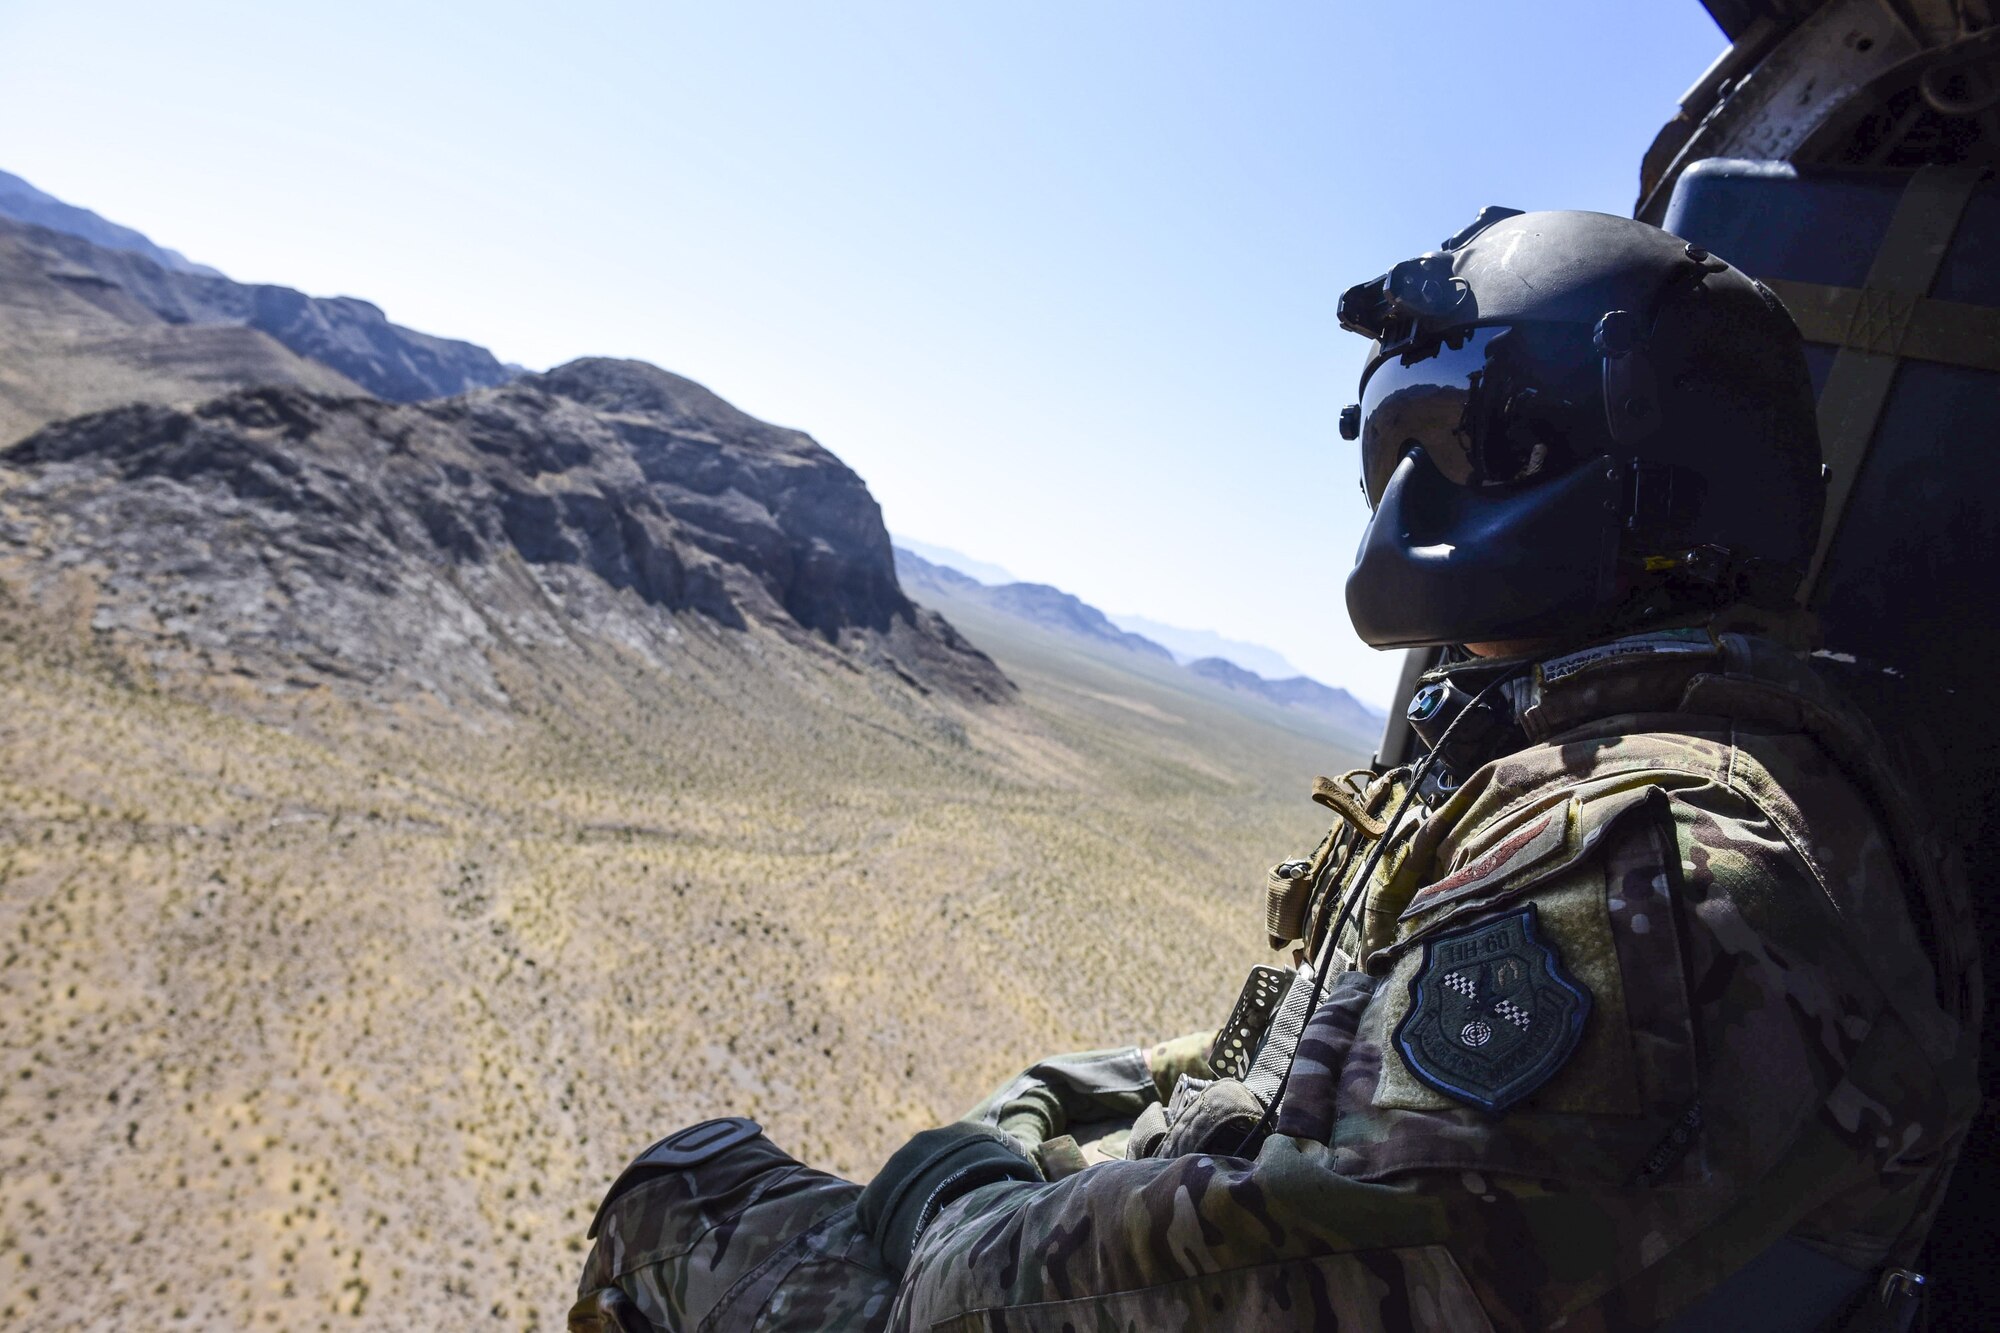 Staff Sgt. Christian Nault, 34th Weapons Squadron special mission aviator, searches the area for the landing zone during a Weapons School Integration mission at the Nevada Test and Training Range June 1, 2017. The HH-60 crew successfully performed a combat search and rescue mission during the exercise. (U.S. Air Force photo by Airman 1st Class Andrew D. Sarver/Released)